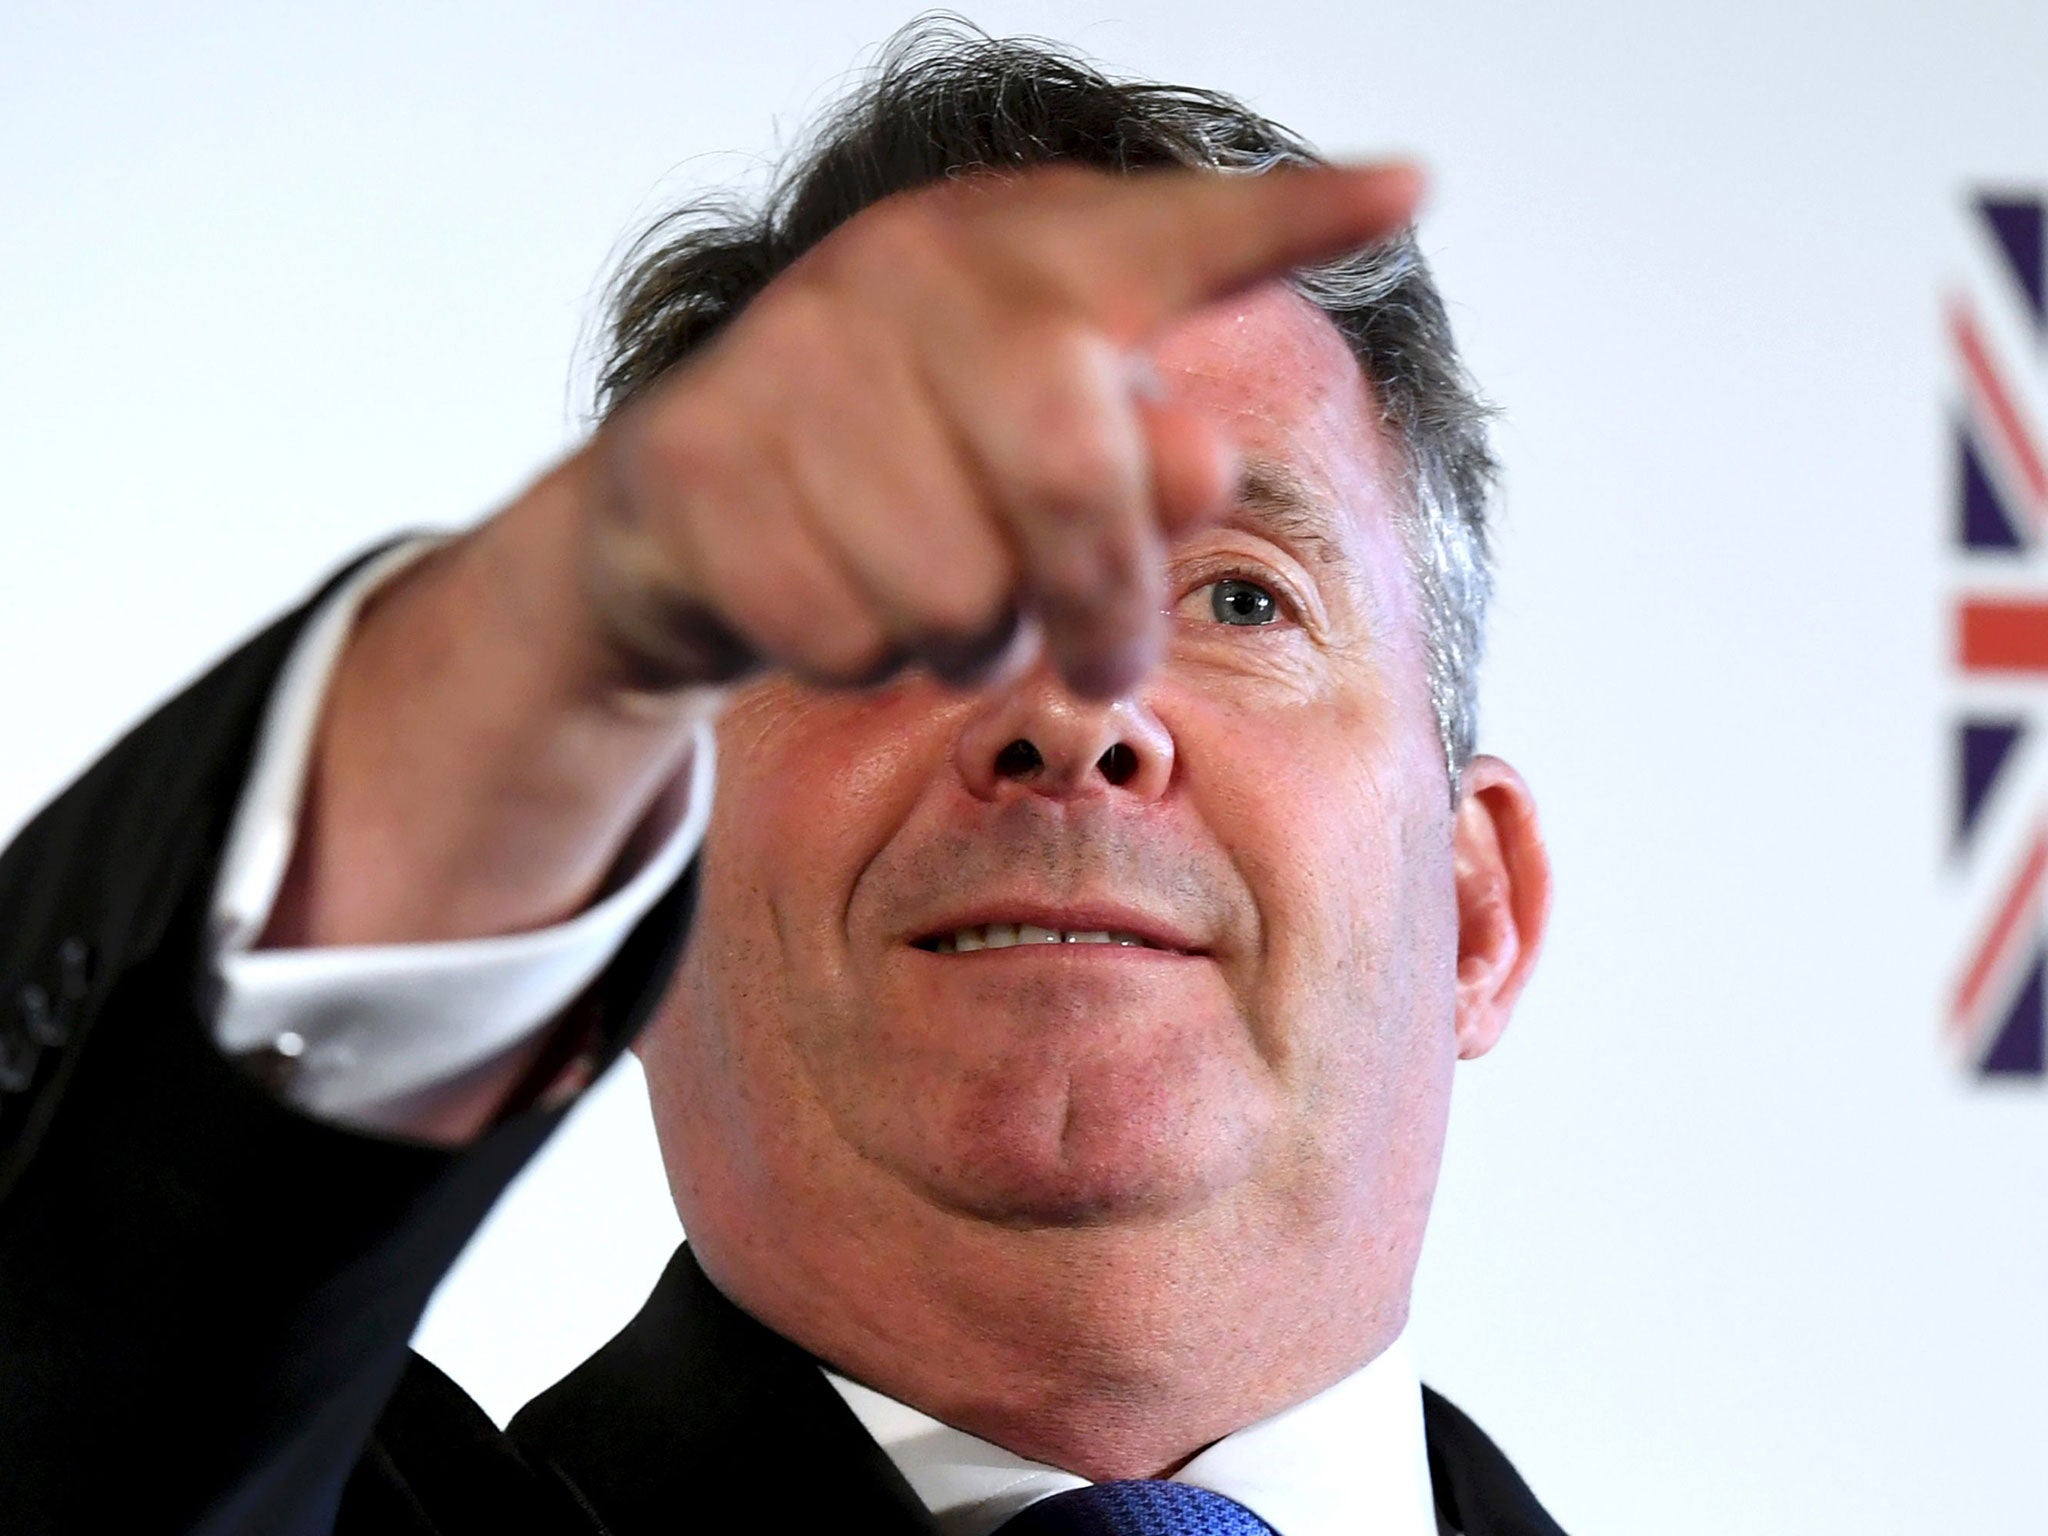 Liam Fox says a debate could not reasonable be scheduled before he signed the agreement